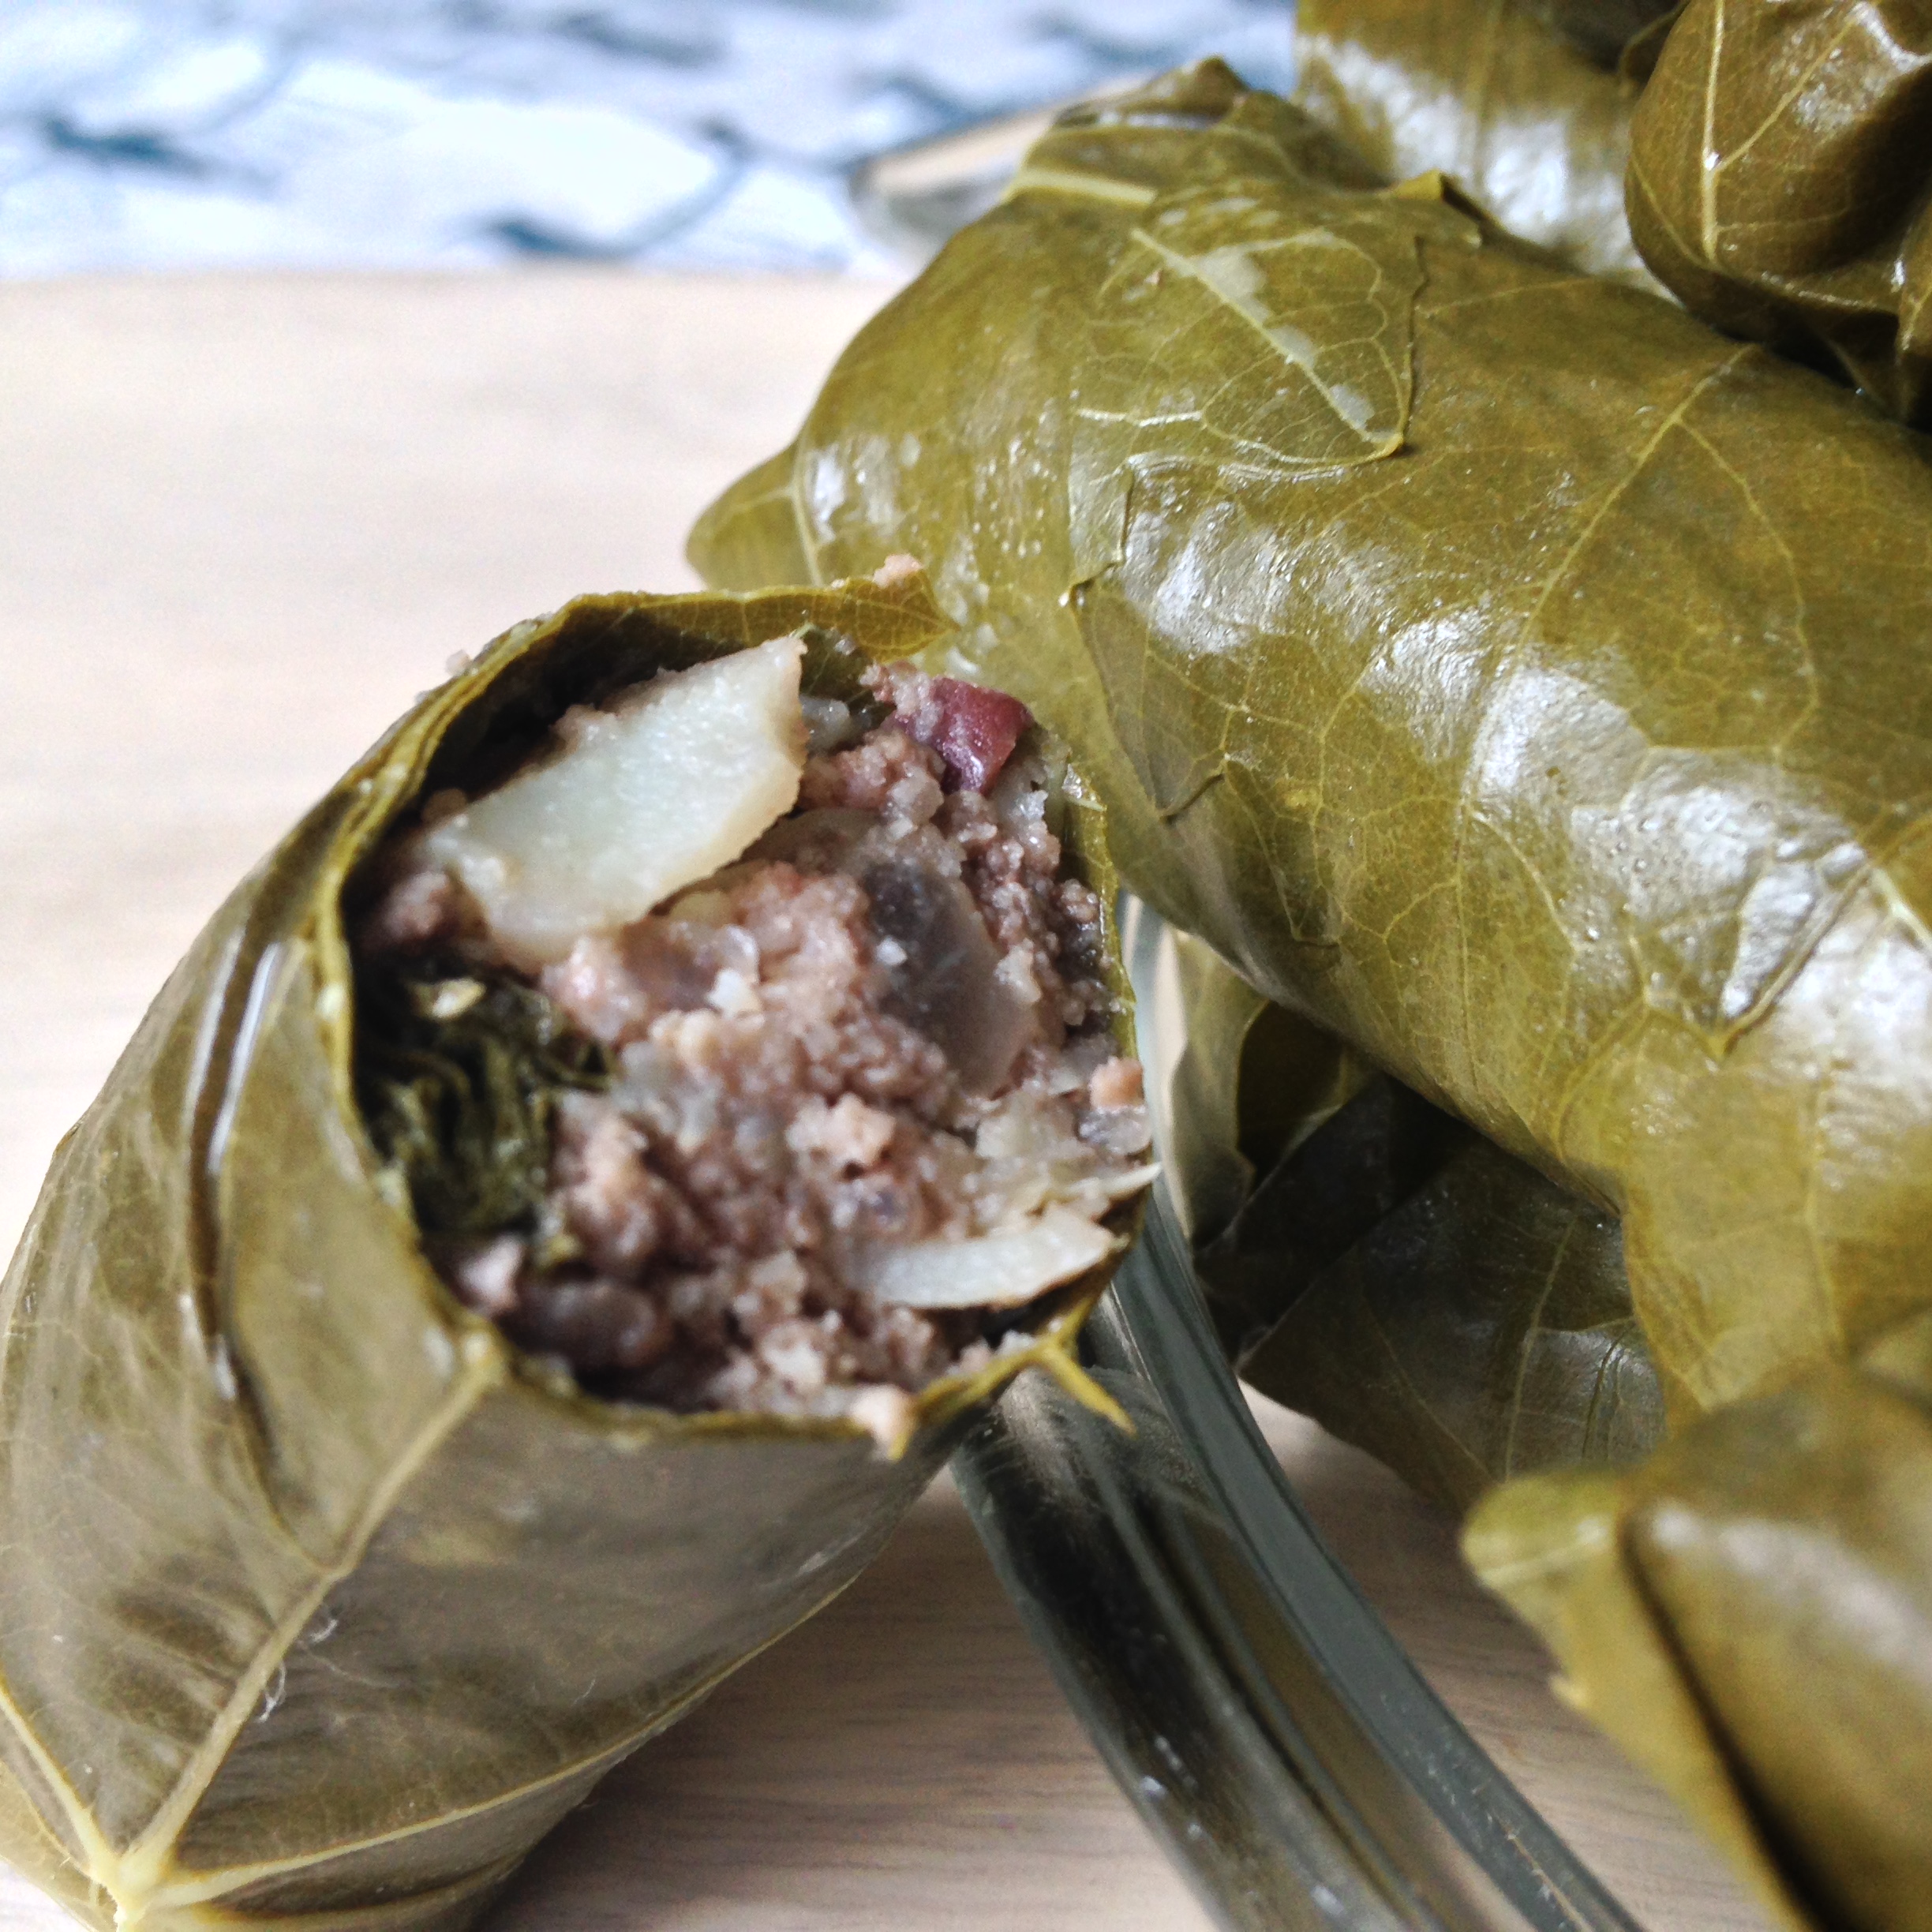 Whole 30 Grape Leaves- Stuffed with Beef and Artichoke